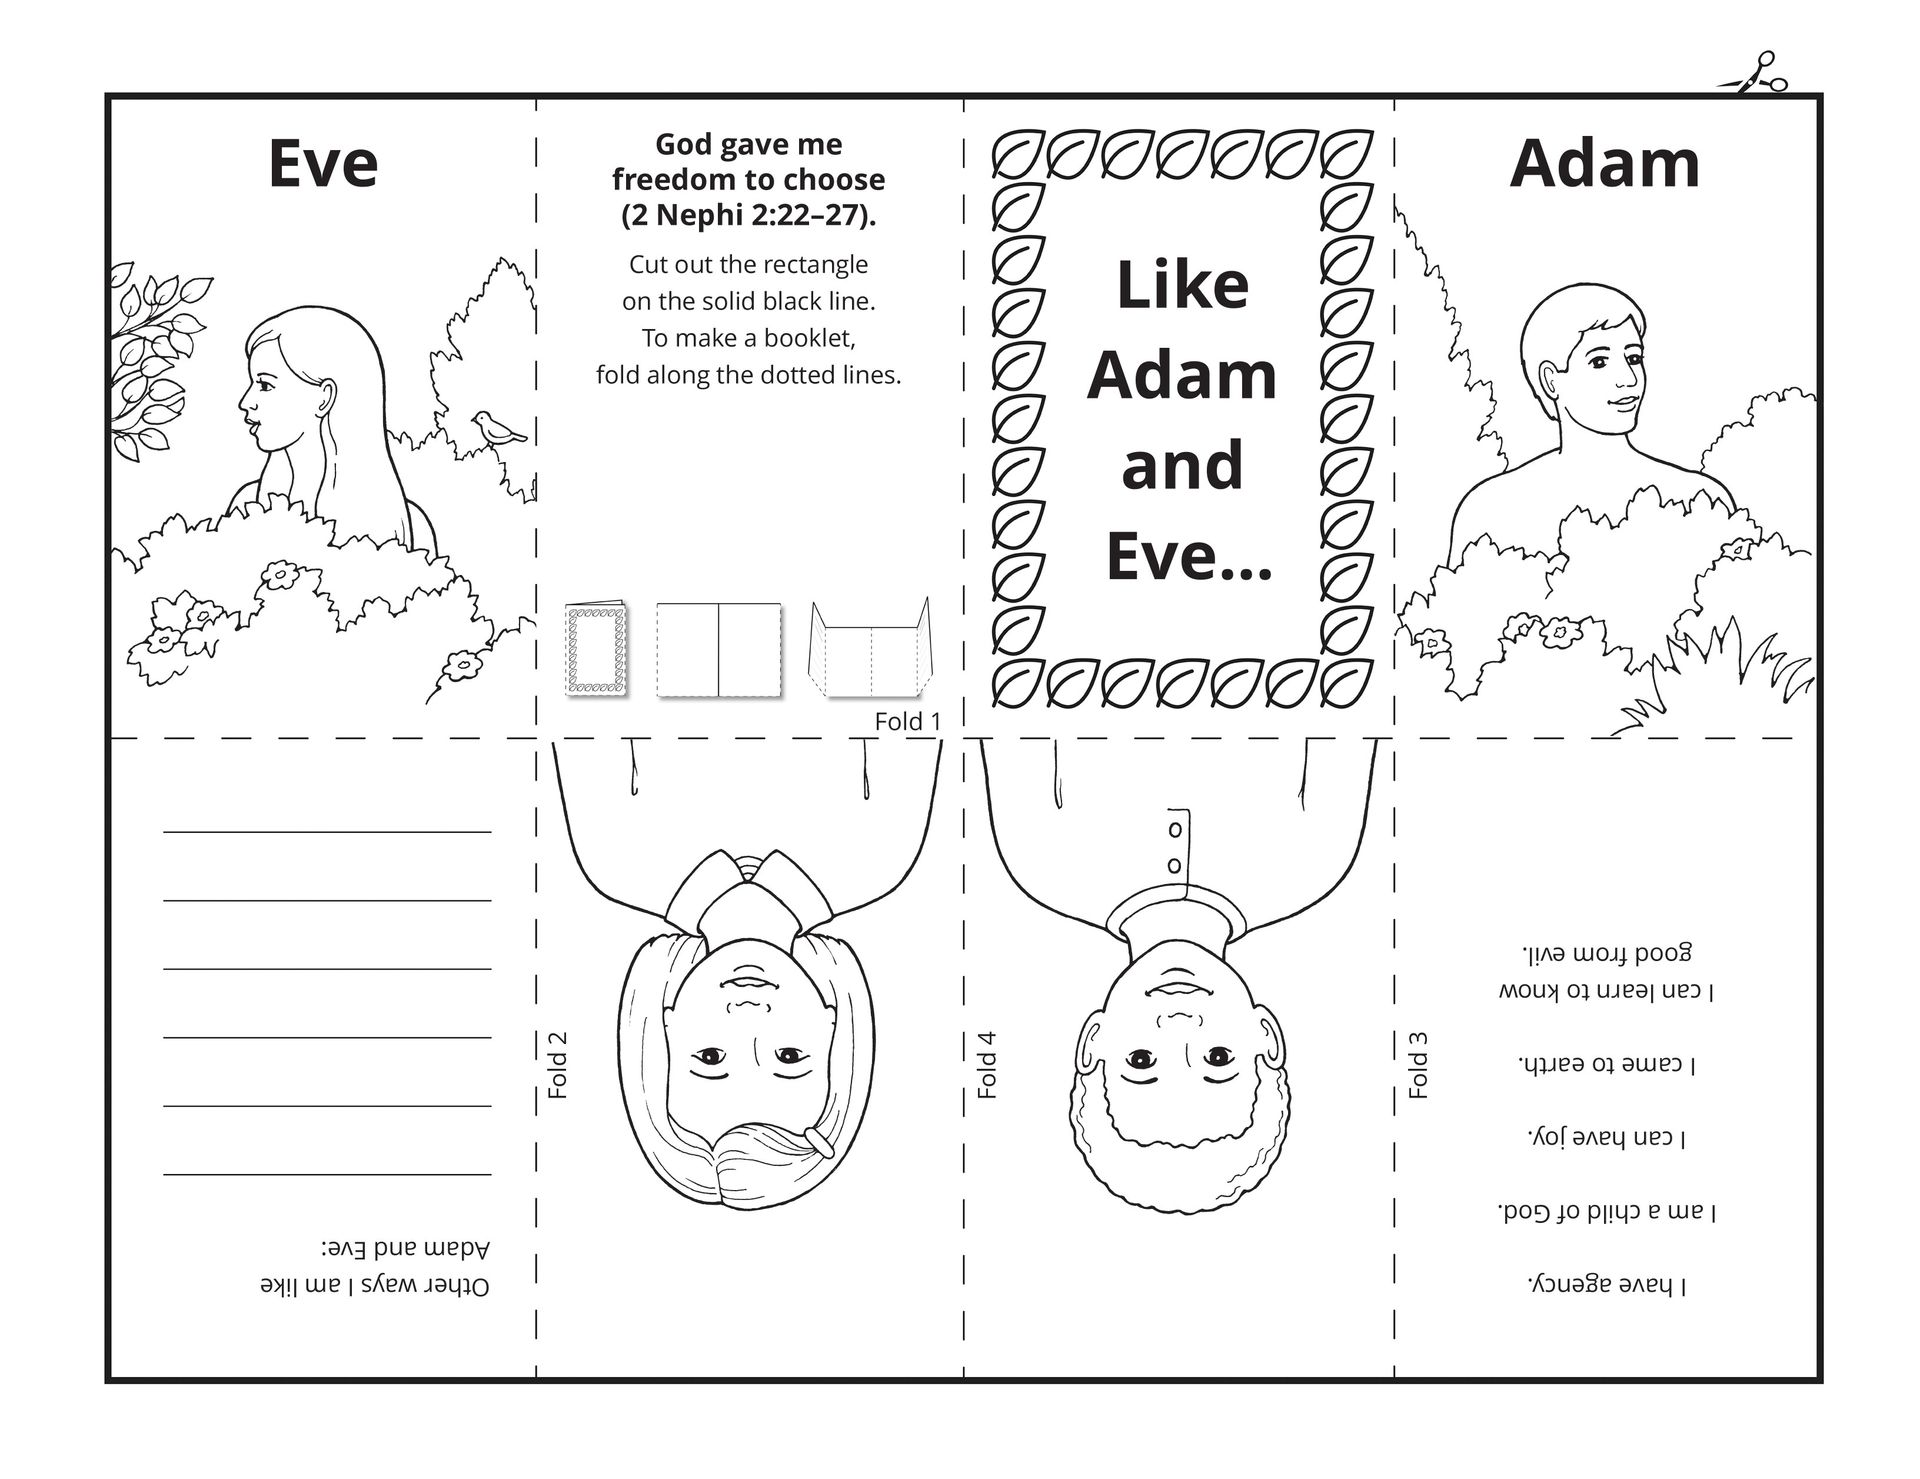 A line-art drawing to help children learn about agency.